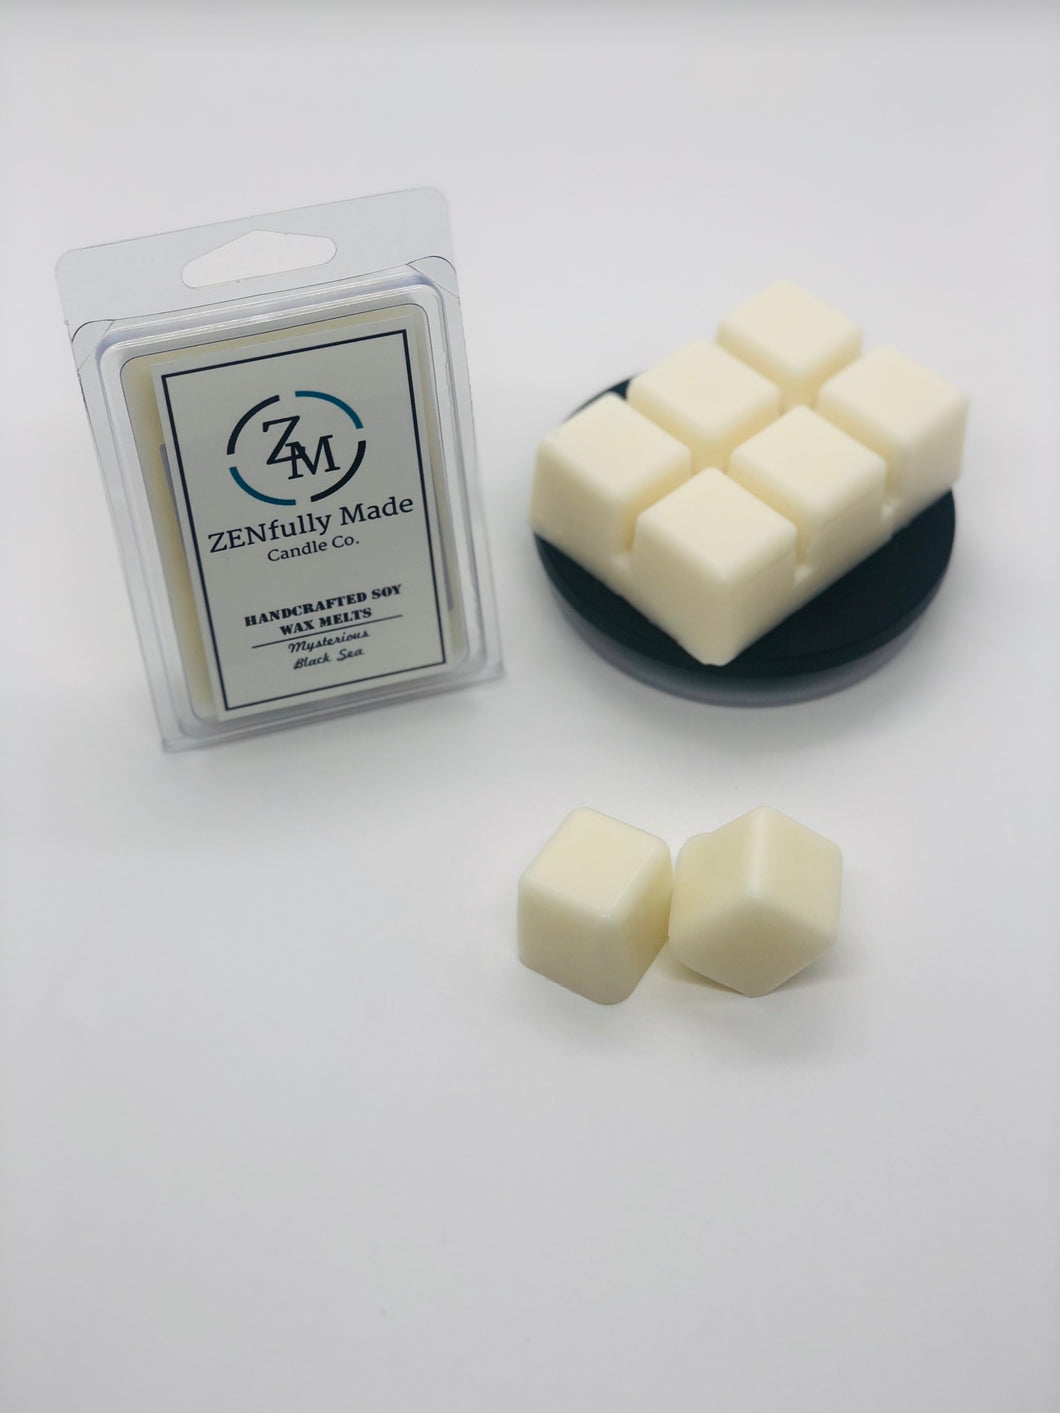 Mysterious Black Sea Wax Melts - ZENfully Made Candle Co.